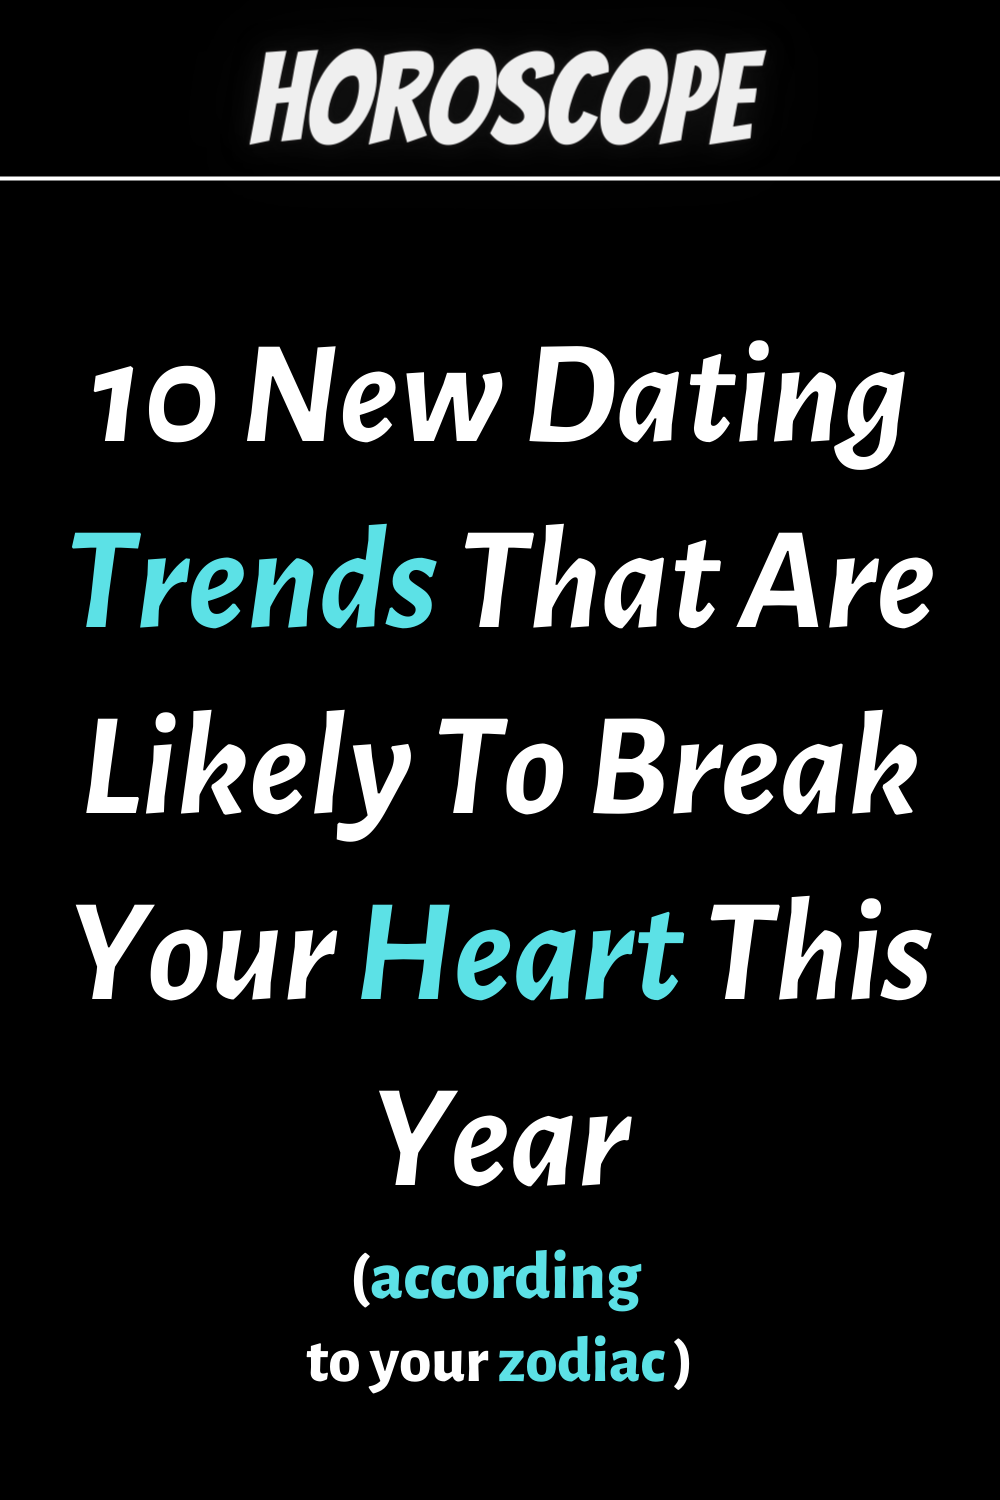 10 New Dating Trends That Are Likely To Break Your Heart This Year ...